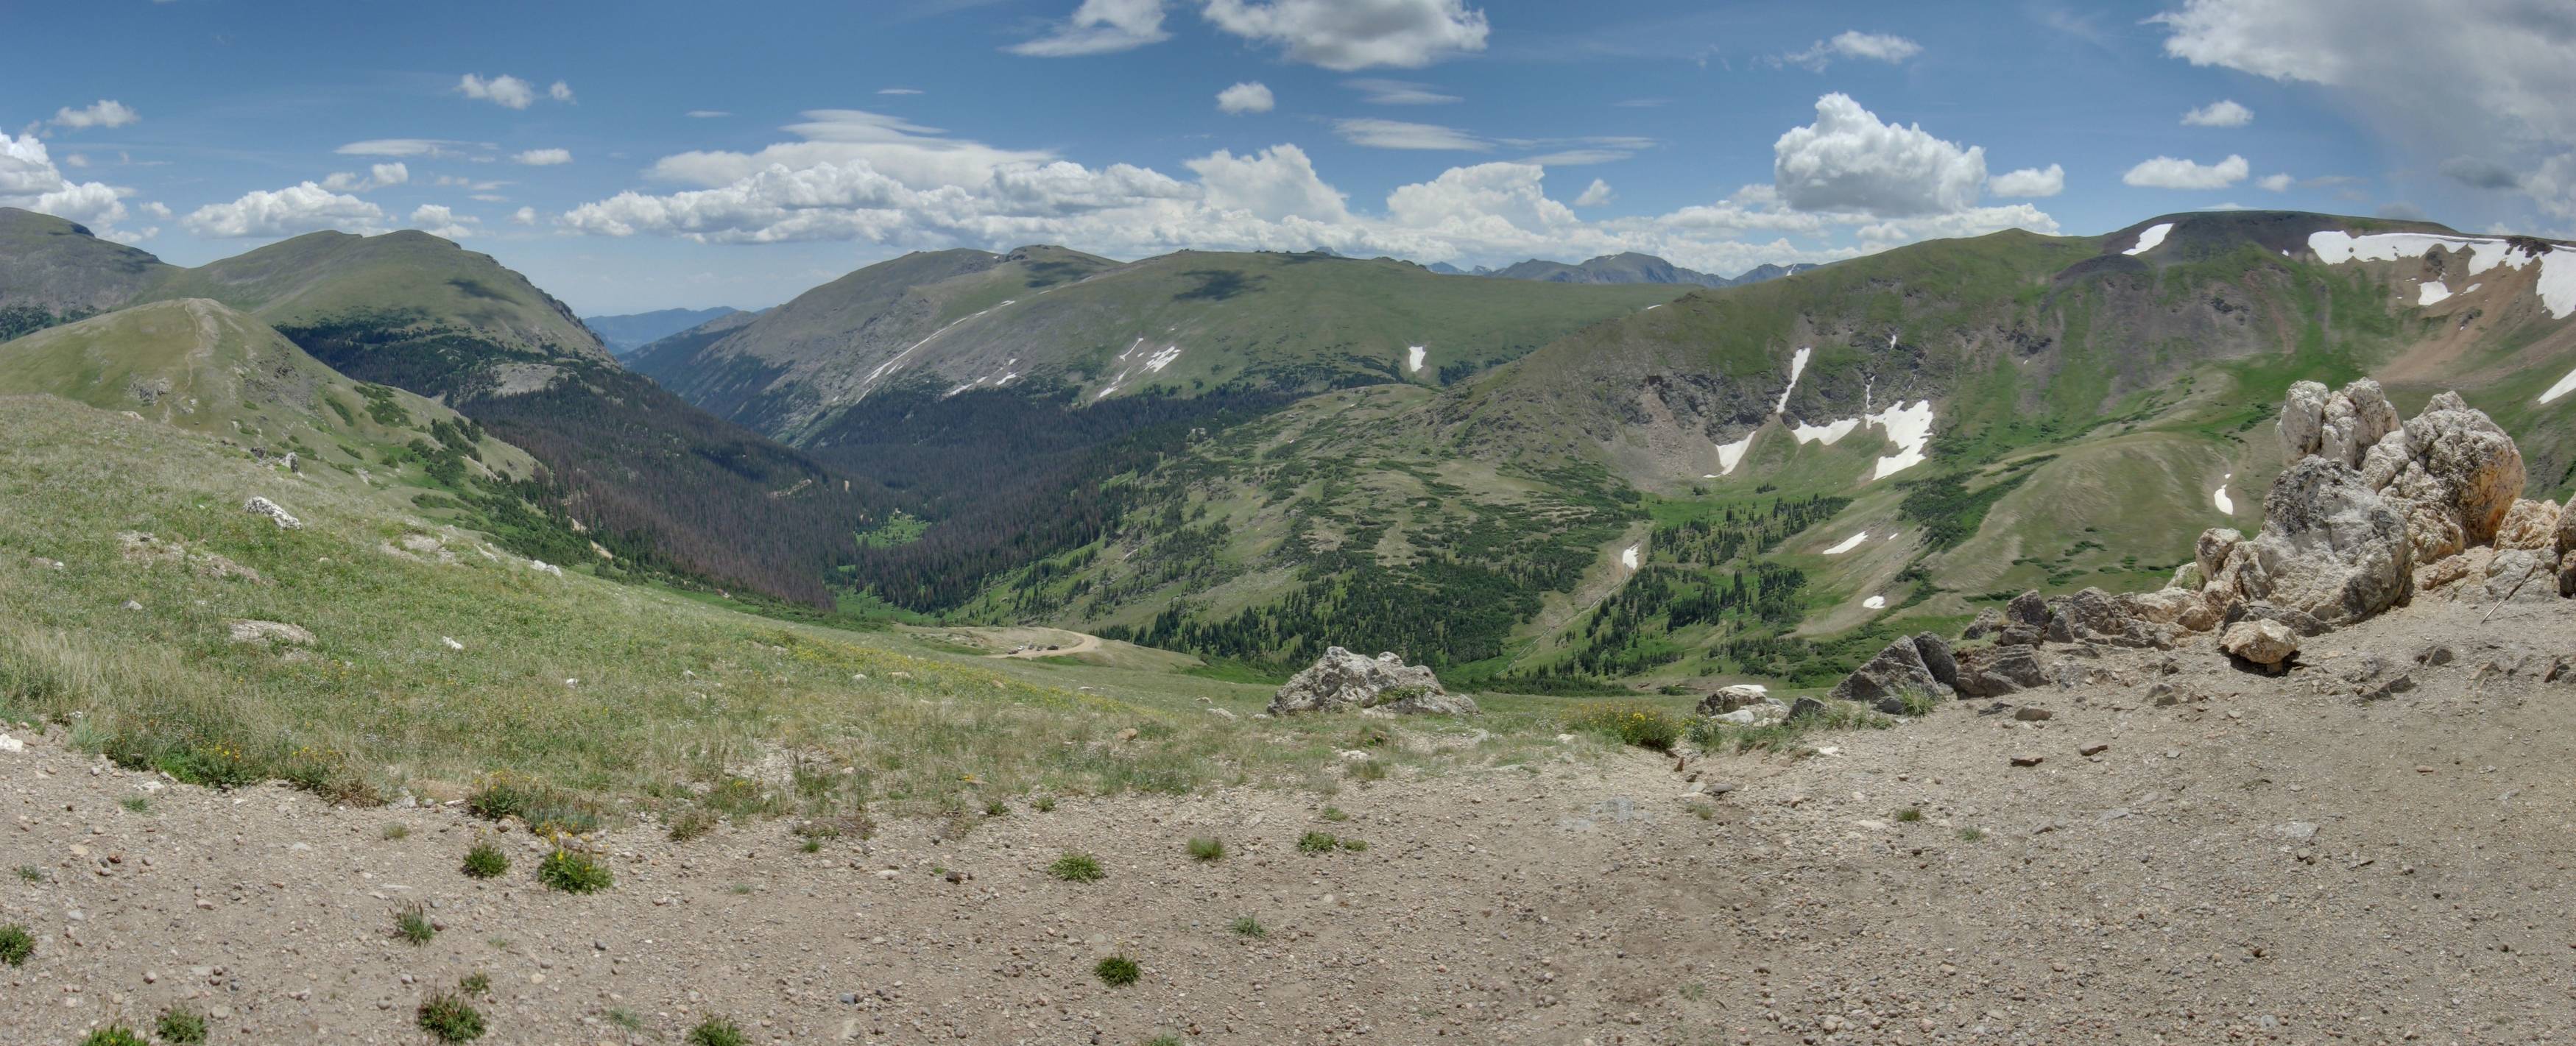 Image: A view from the end of the Alpine Ridge Trail